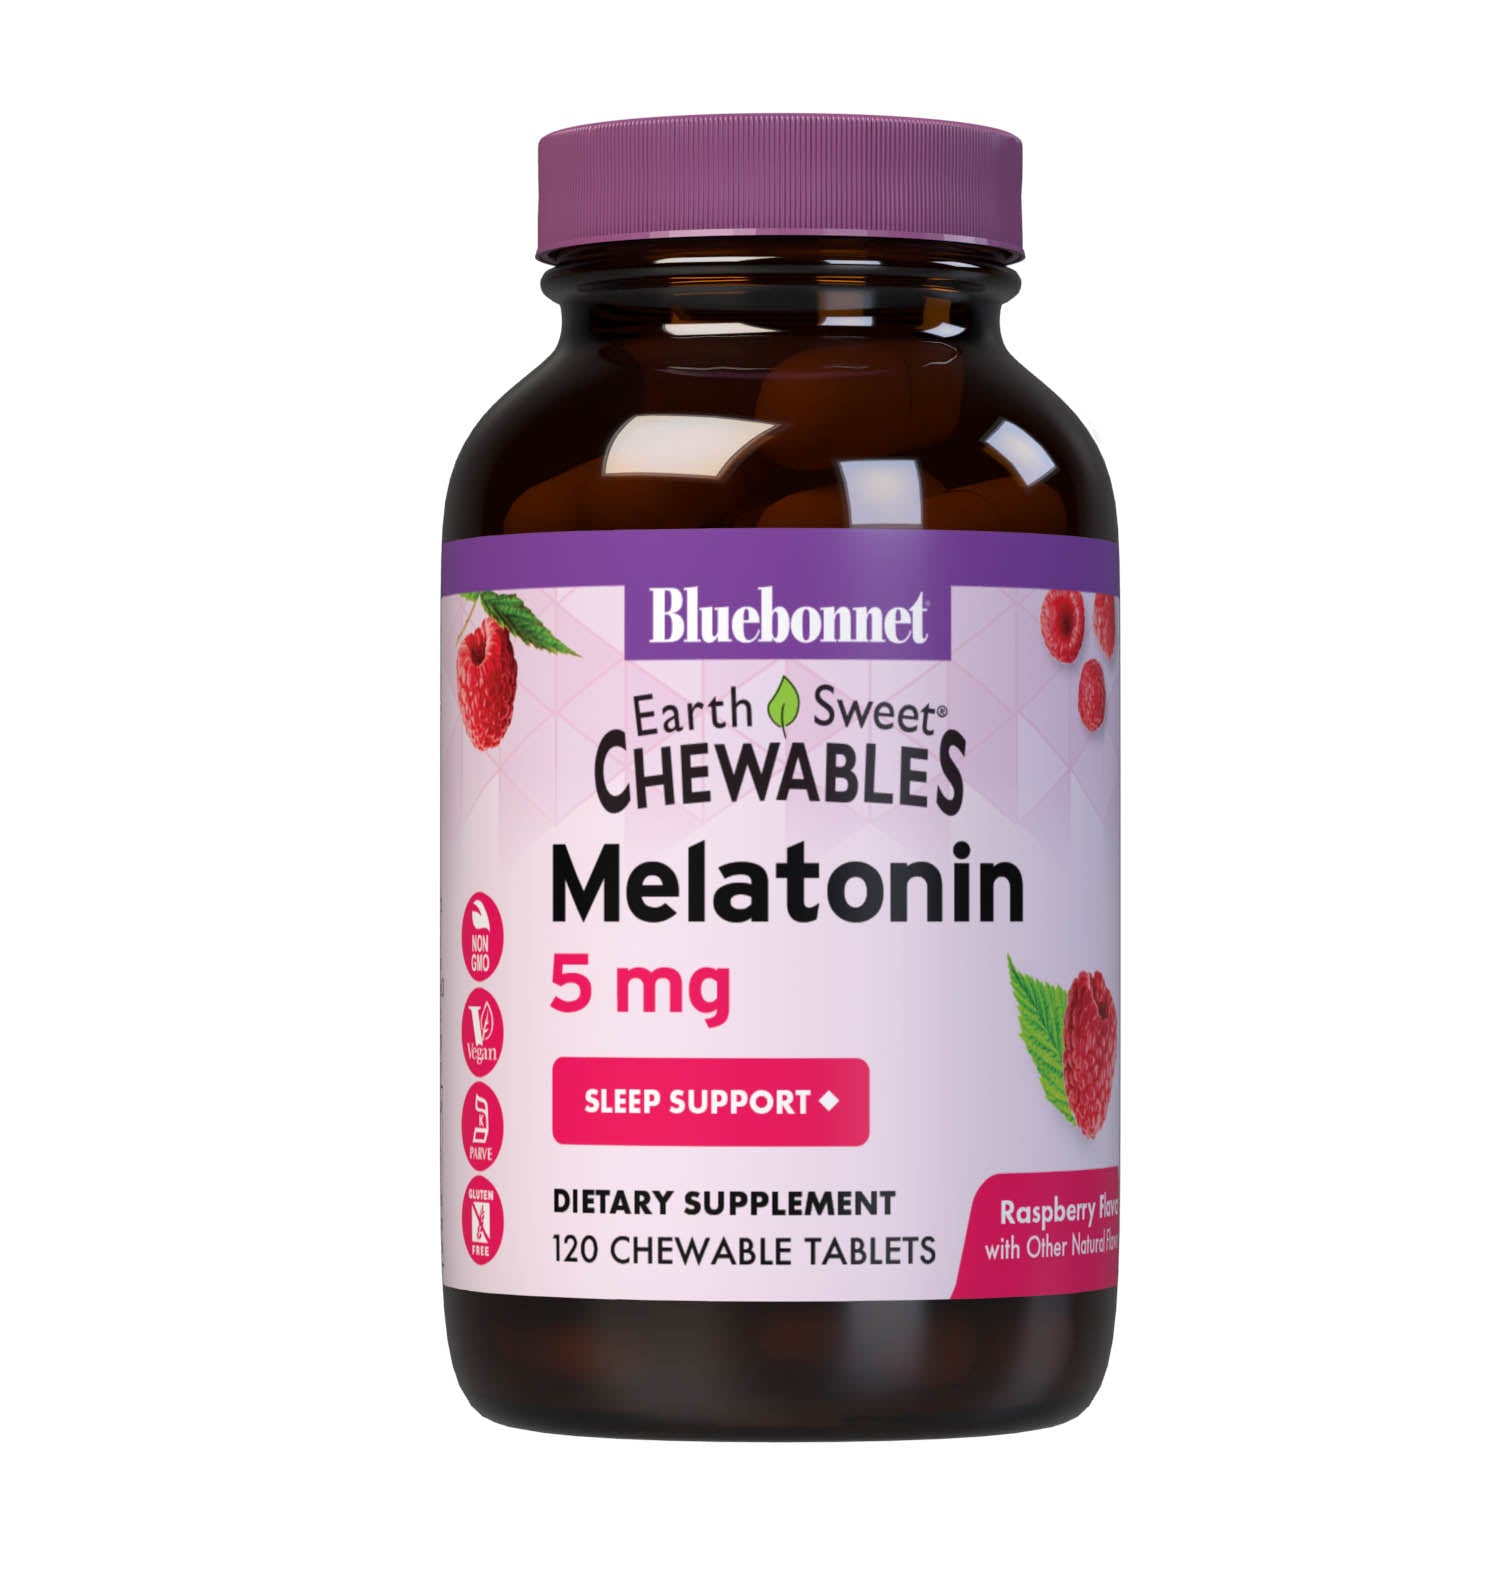 Bluebonnet’s EarthSweet Chewables Melatonin 5 mg 120 Tablets help minimize occasional sleeplessness for those affected by disturbed sleep/wake cycles, such as those traveling across multiple time zones. This product is sweetened with EarthSweet, a proprietary mix of fruit powders and sugar cane crystals. #size_120 count